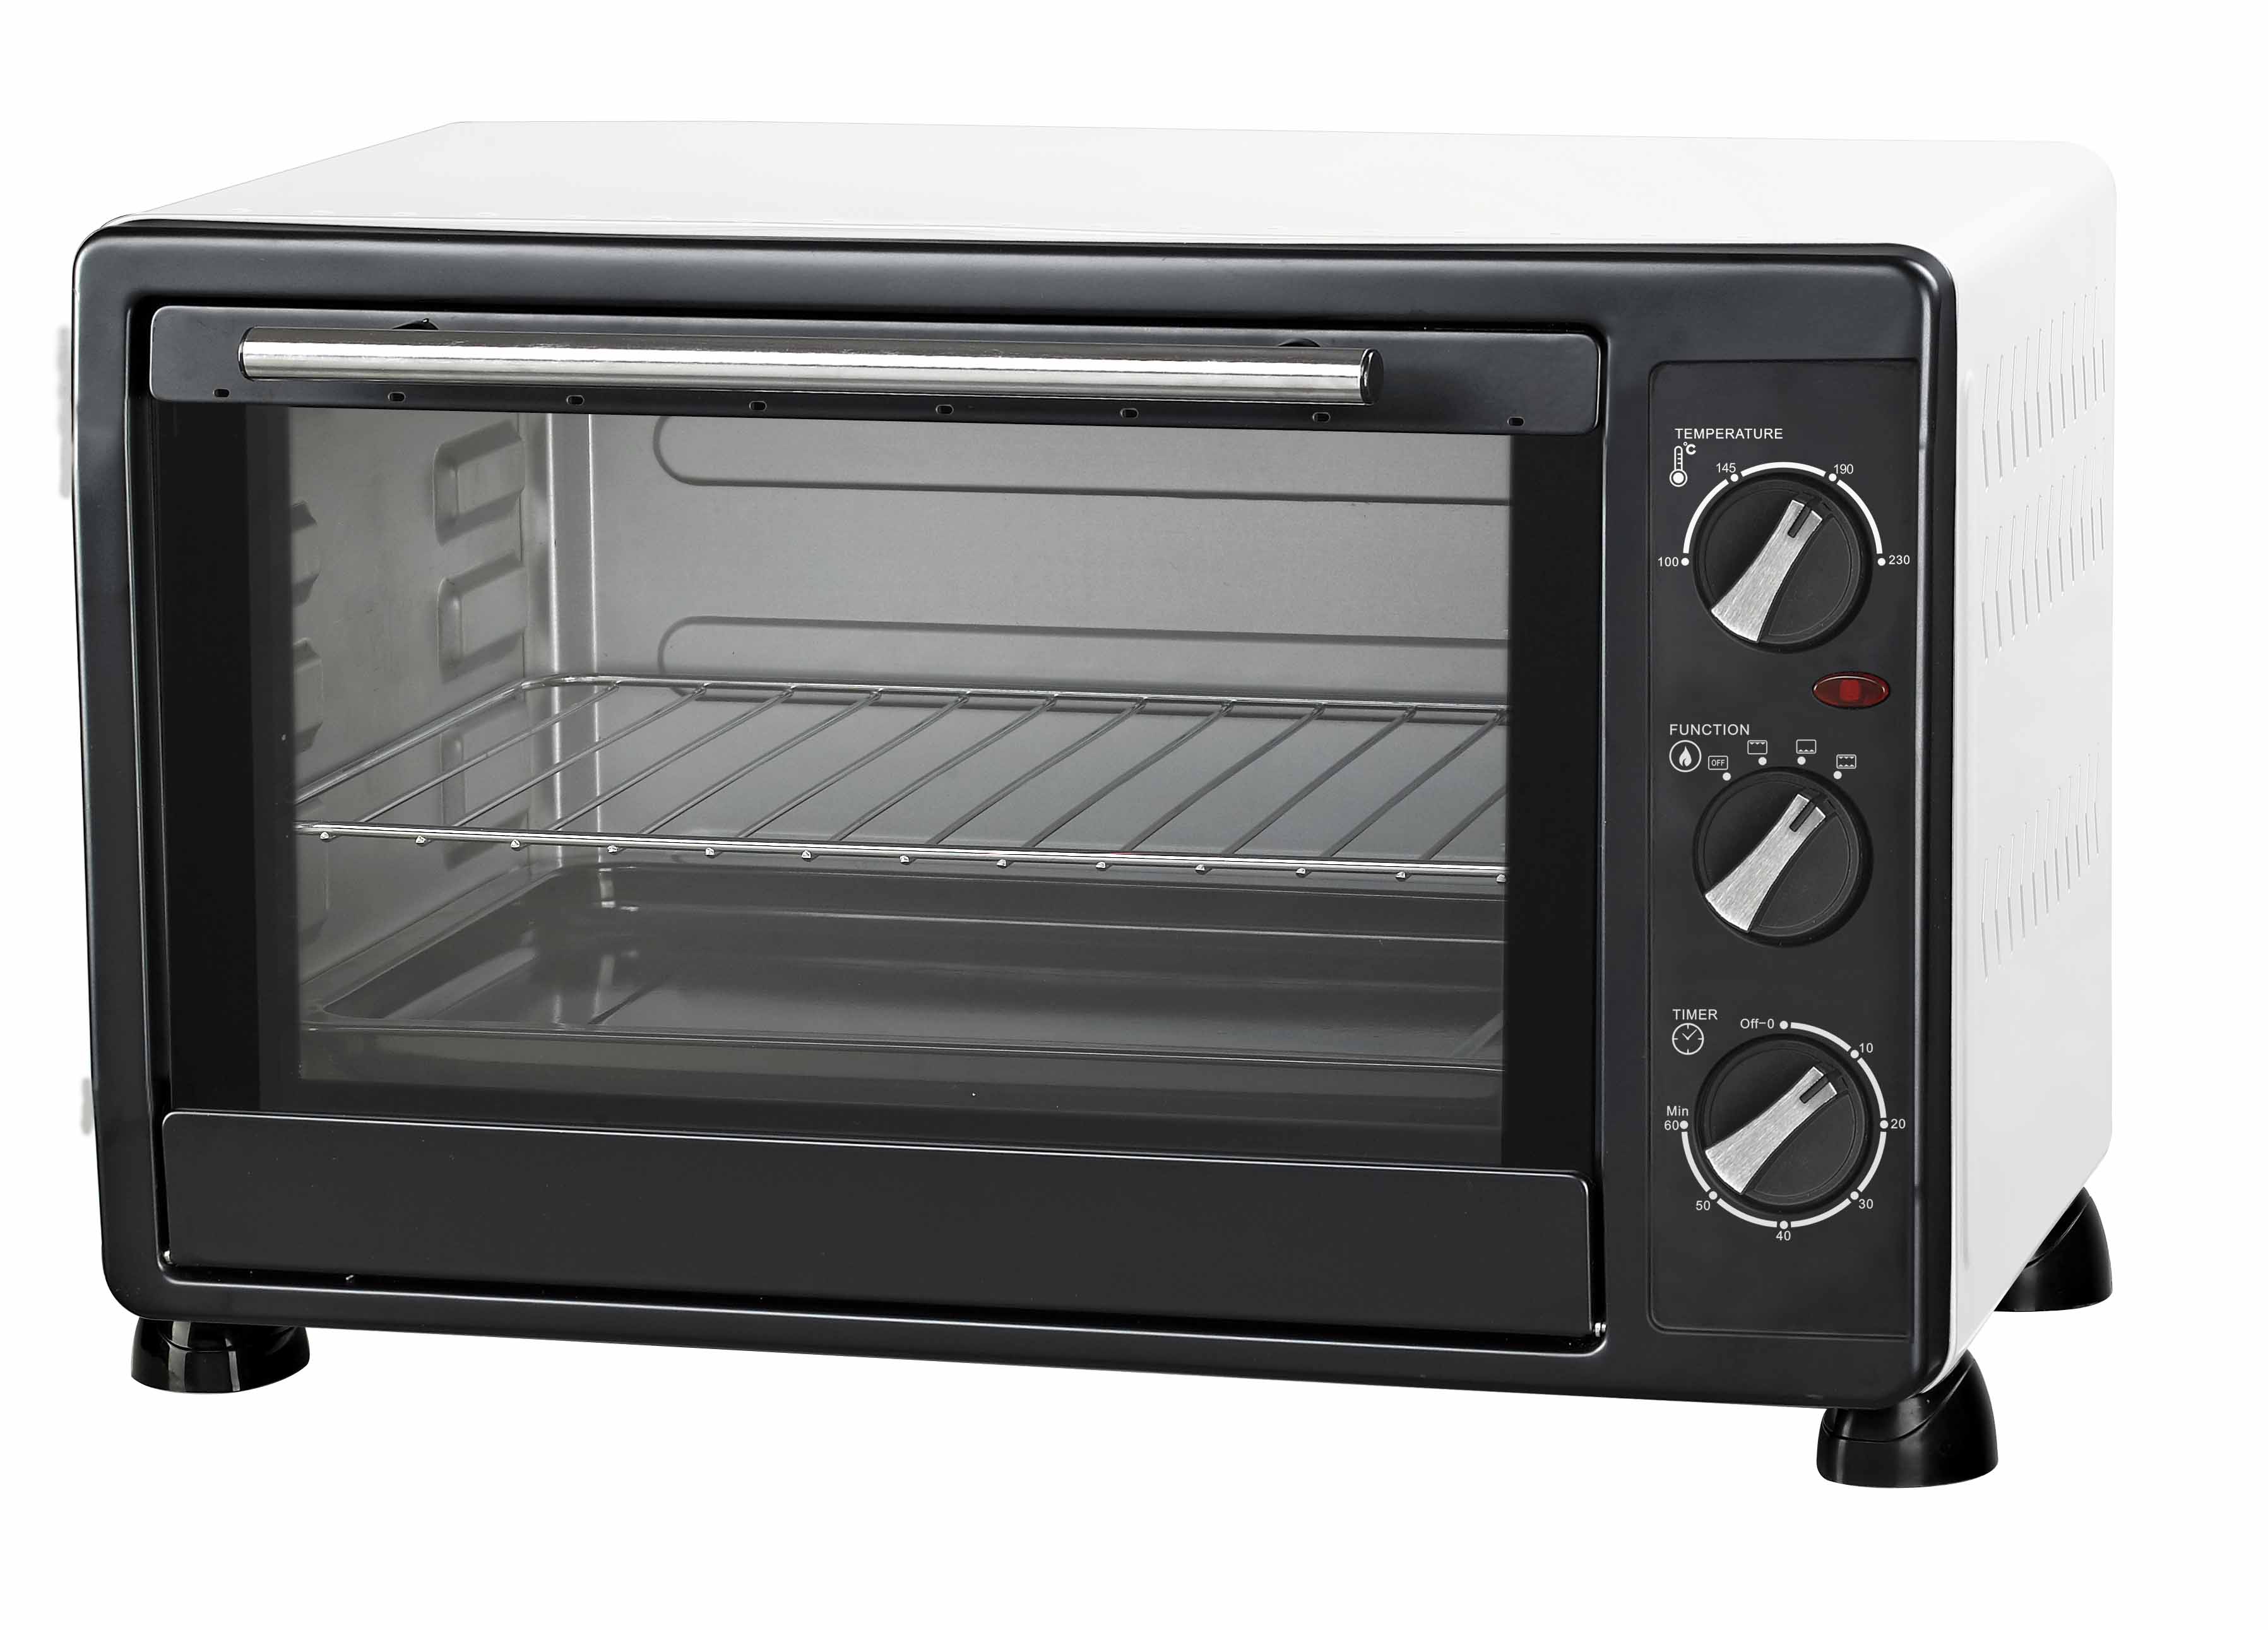 33L black toaster oven with Rotisserie & Convection function